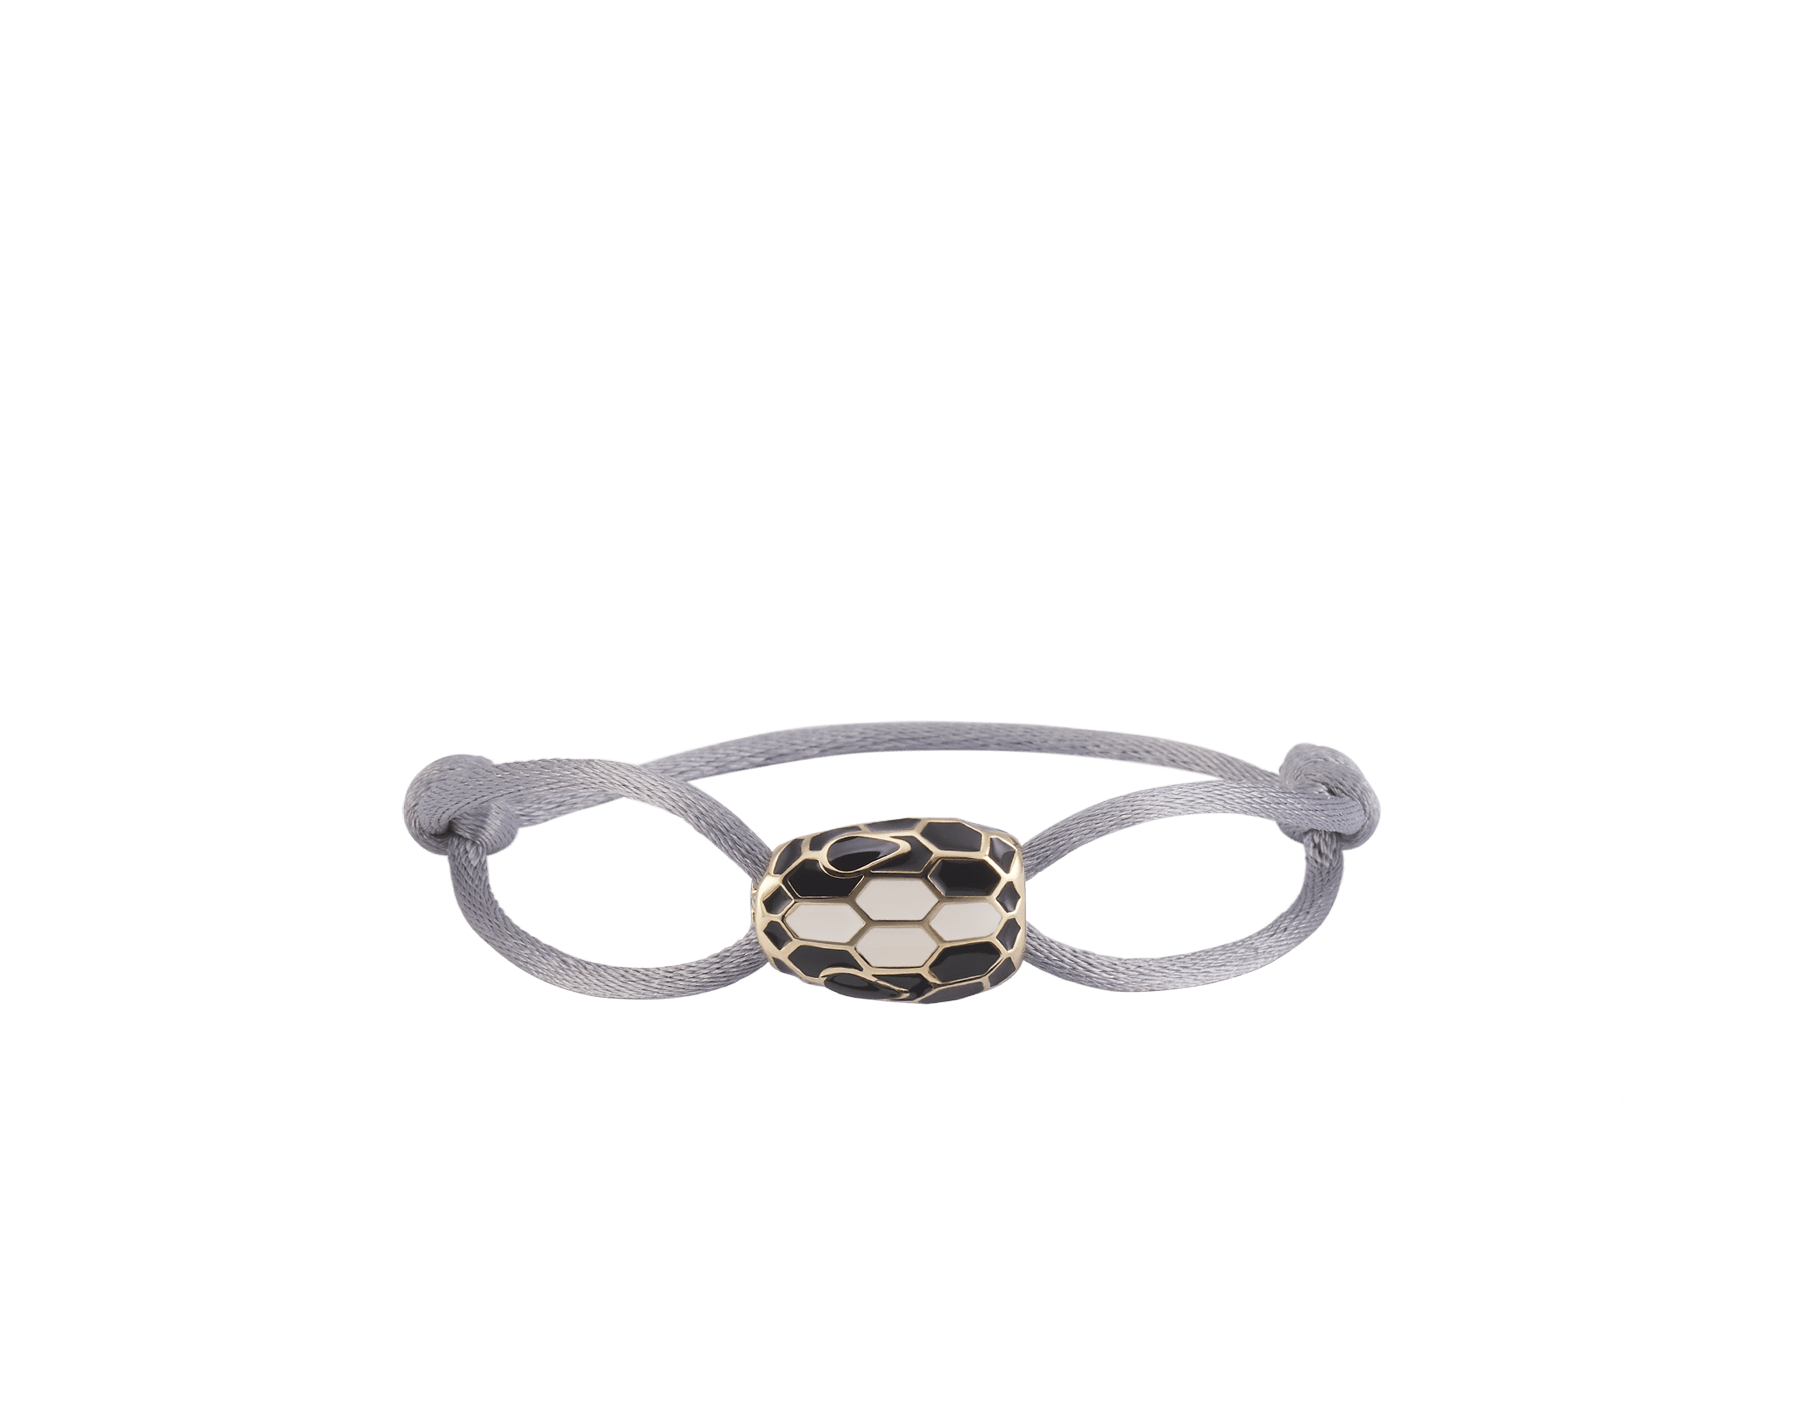 Serpenti Forever bracelet in foggy opal gray fabric. Captivating light gold-plated brass snakehead embellishment with black and white agate enamel scales and black enamel eyes. SERP-STRINGf image 1